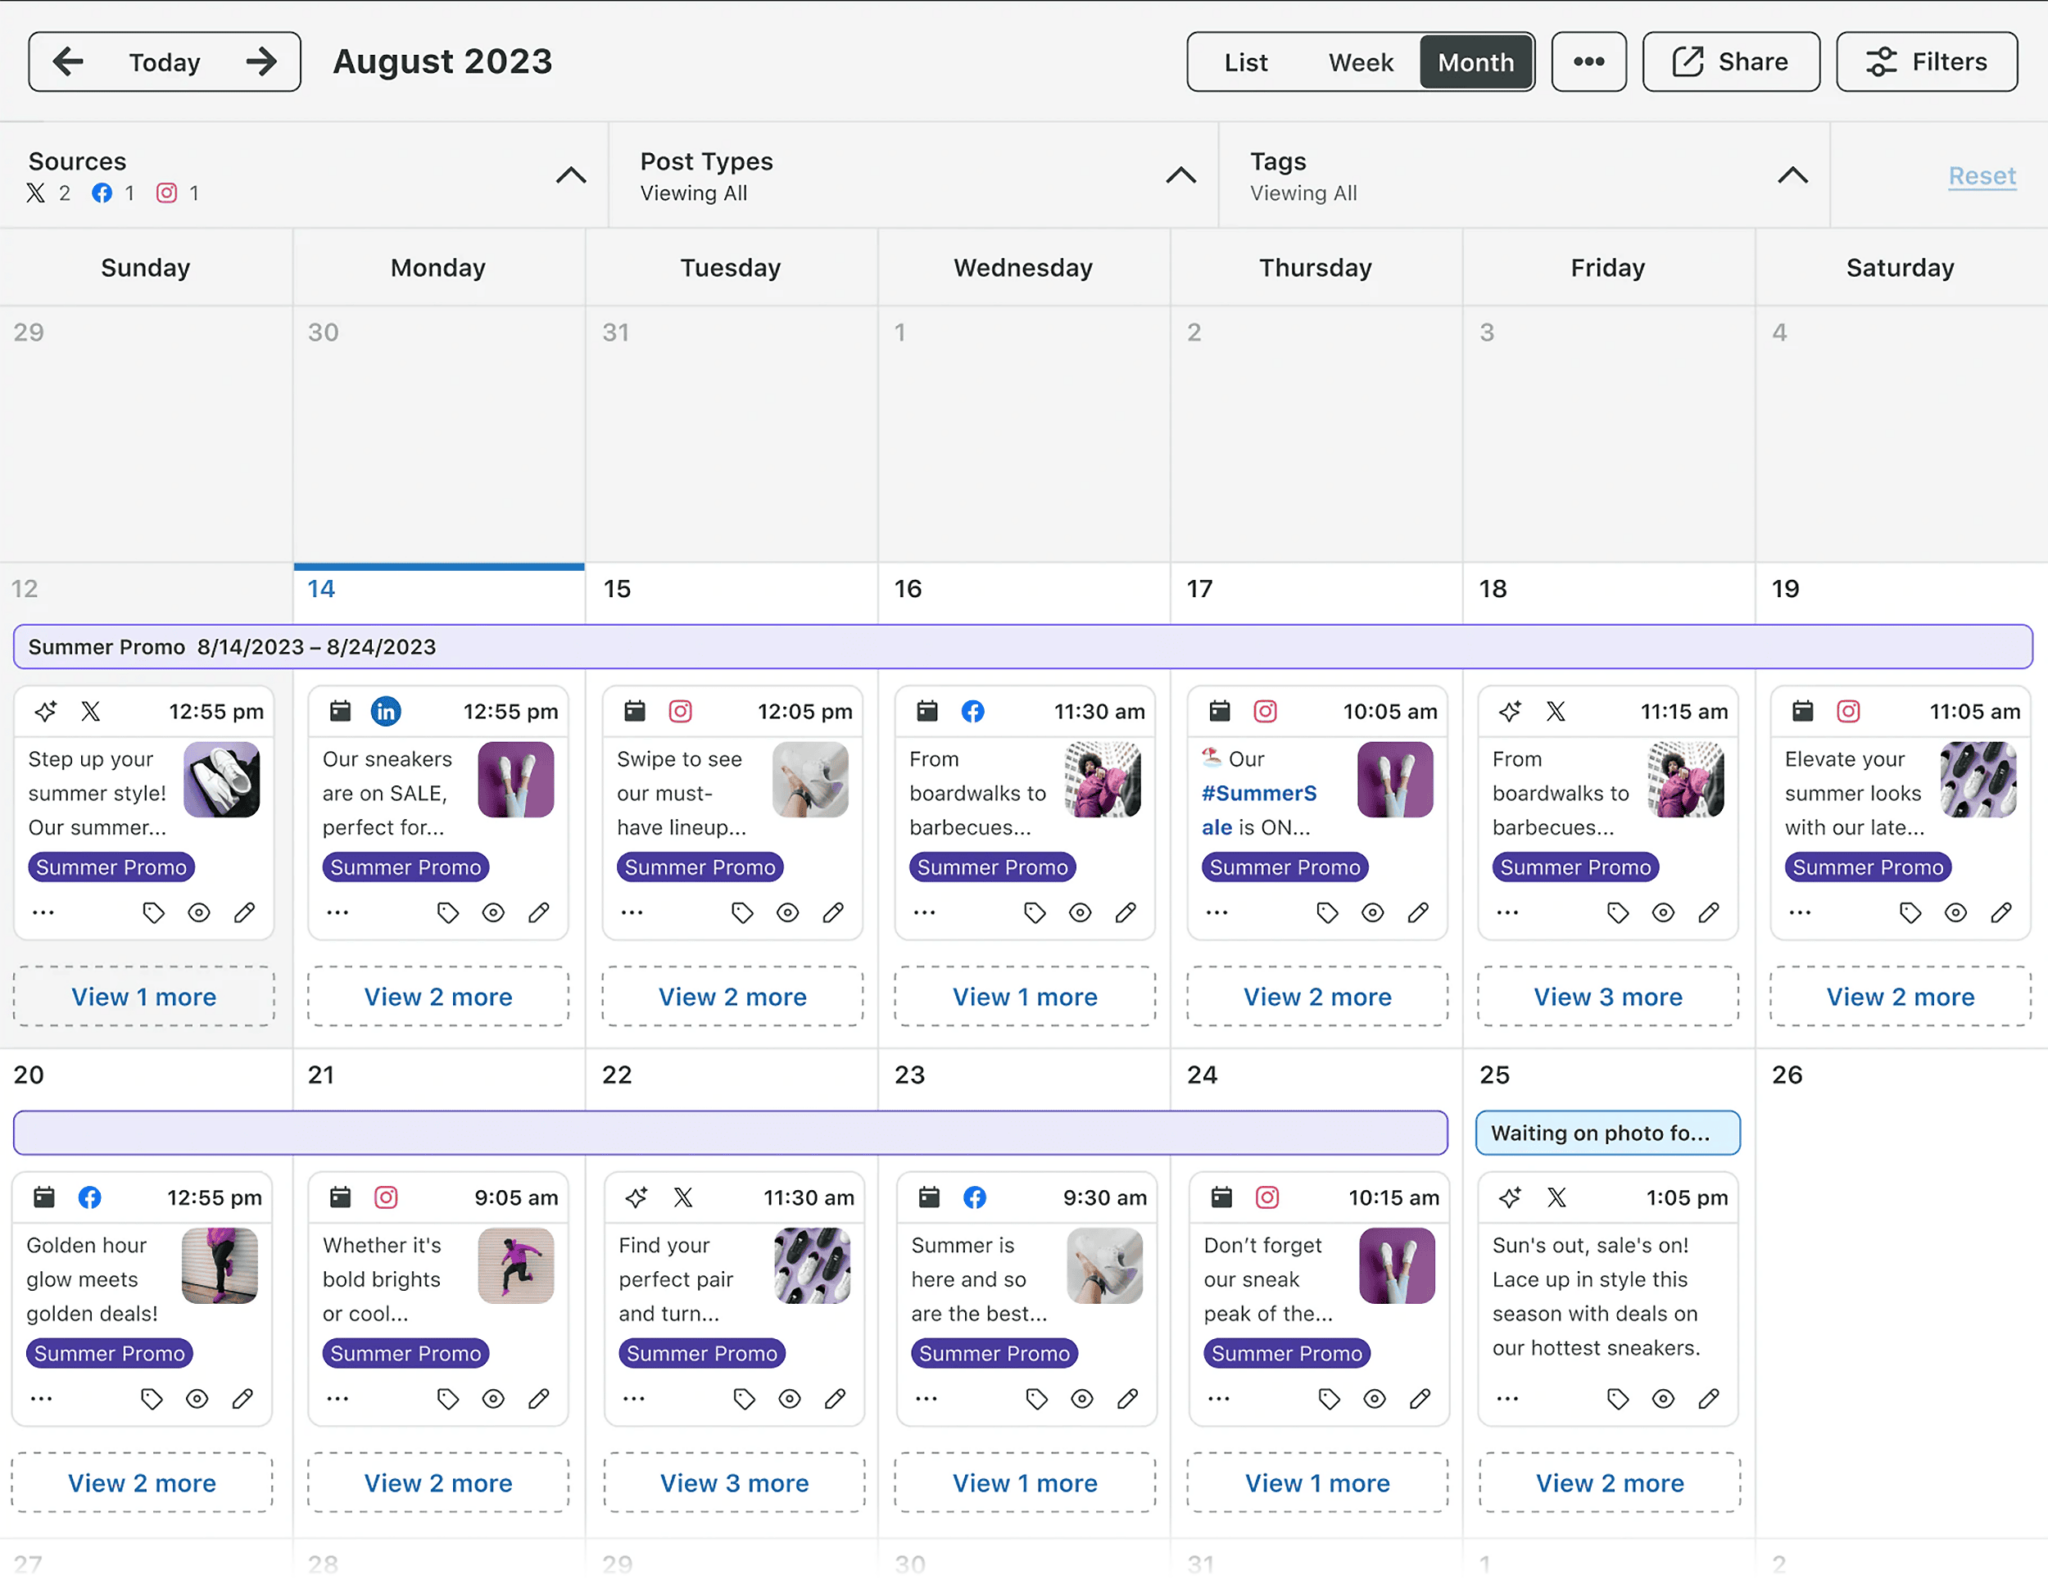 sproutsocial-content-calendar 29 Top Digital Marketing Tools for Every Budget